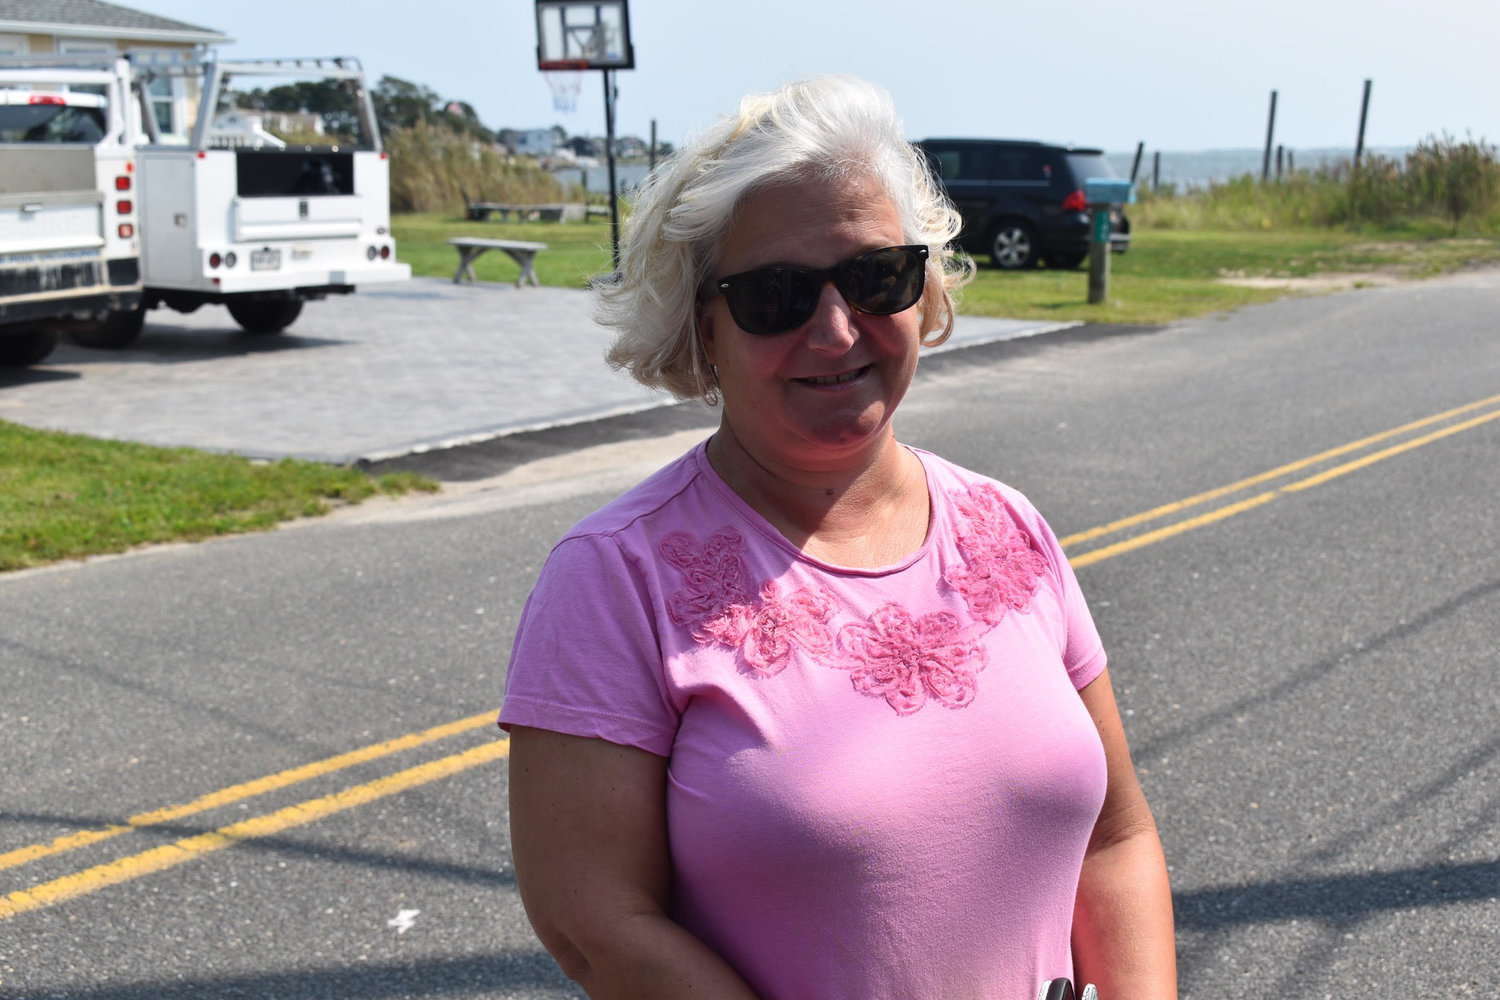 Center Moriches, Main Street
Name: Laurie Seebeck
Favorite fall activity: “I like decorating the house for Halloween. When my son was little, we decorated together and the tradition has continued to today.”